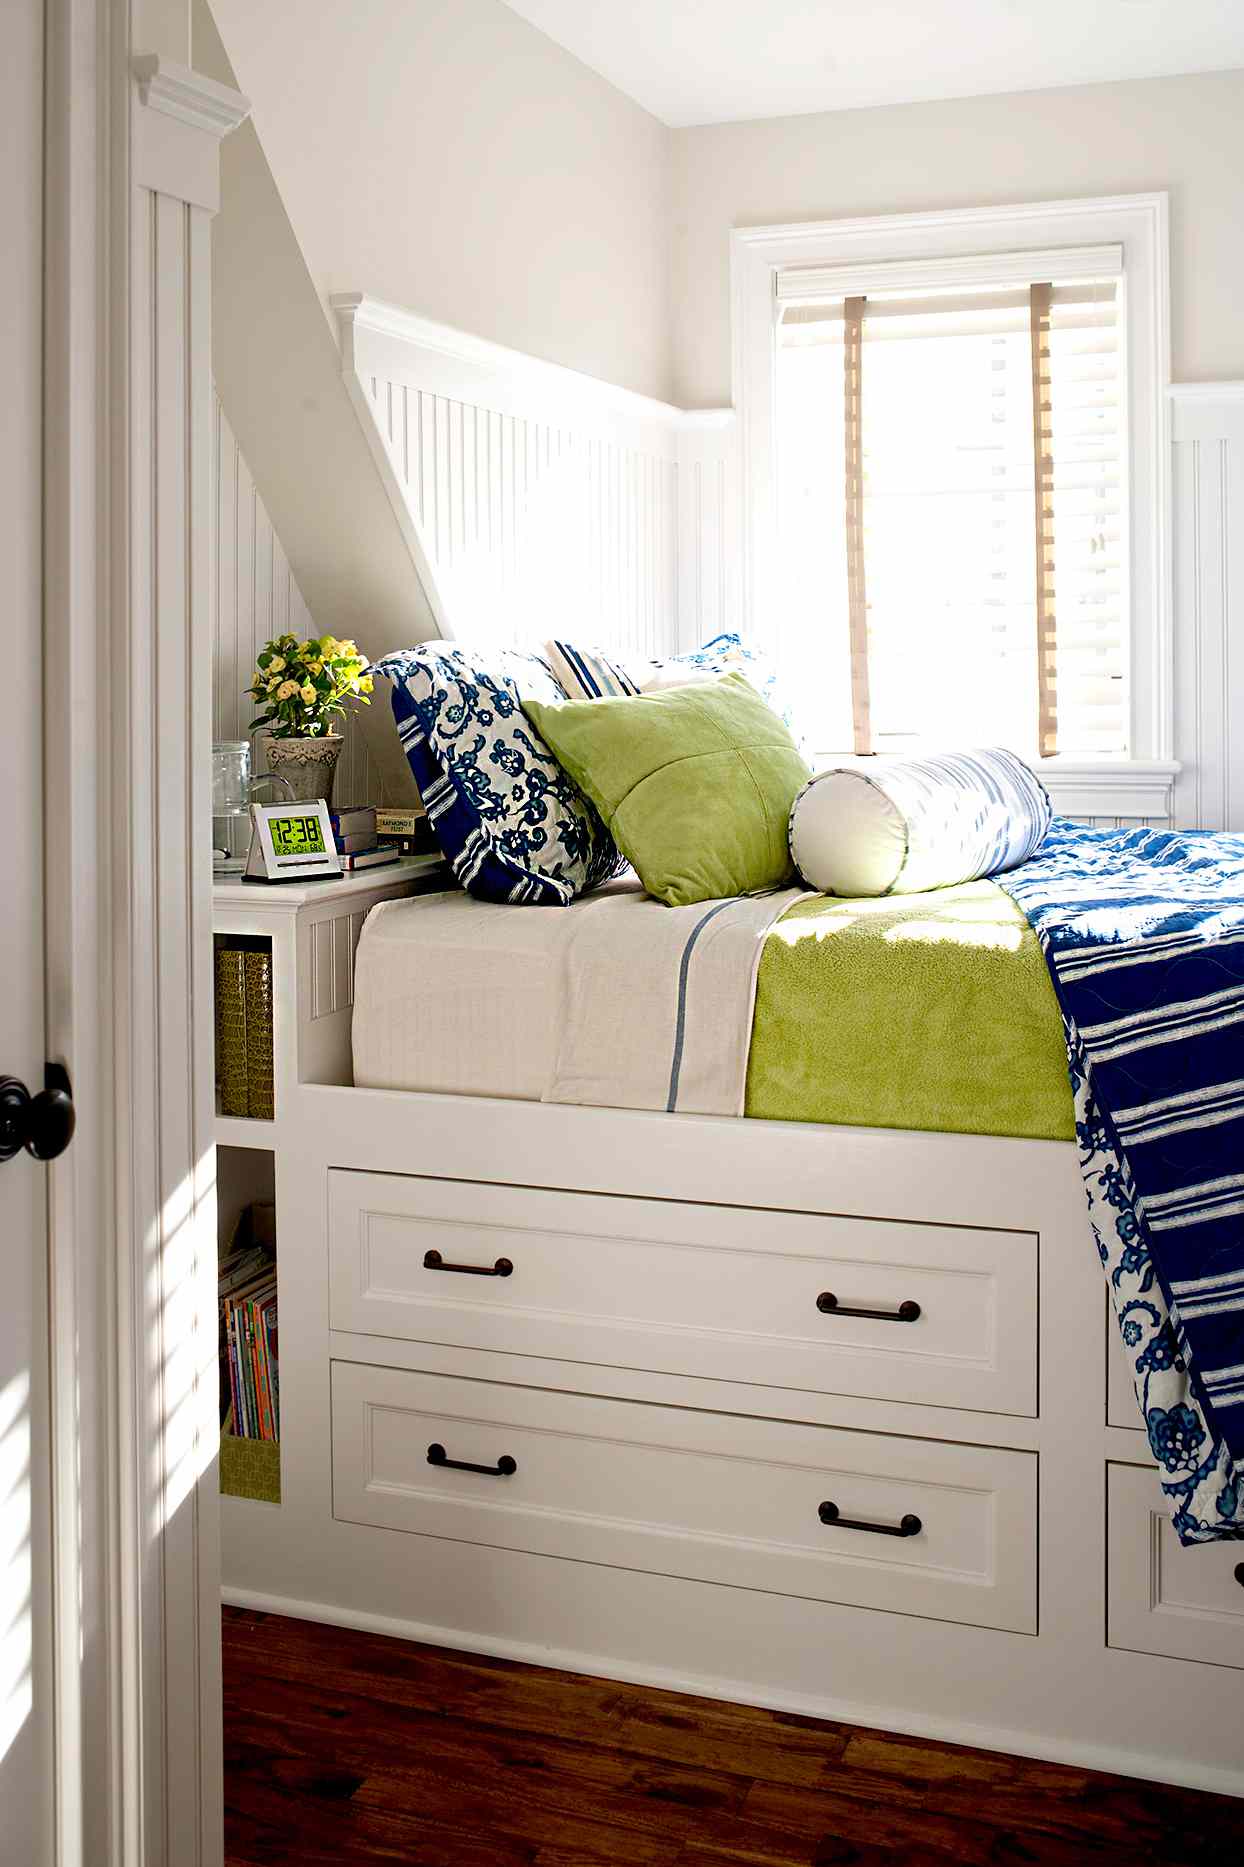 19 Genius Storage Solutions For Small Bedrooms Better Homes Gardens